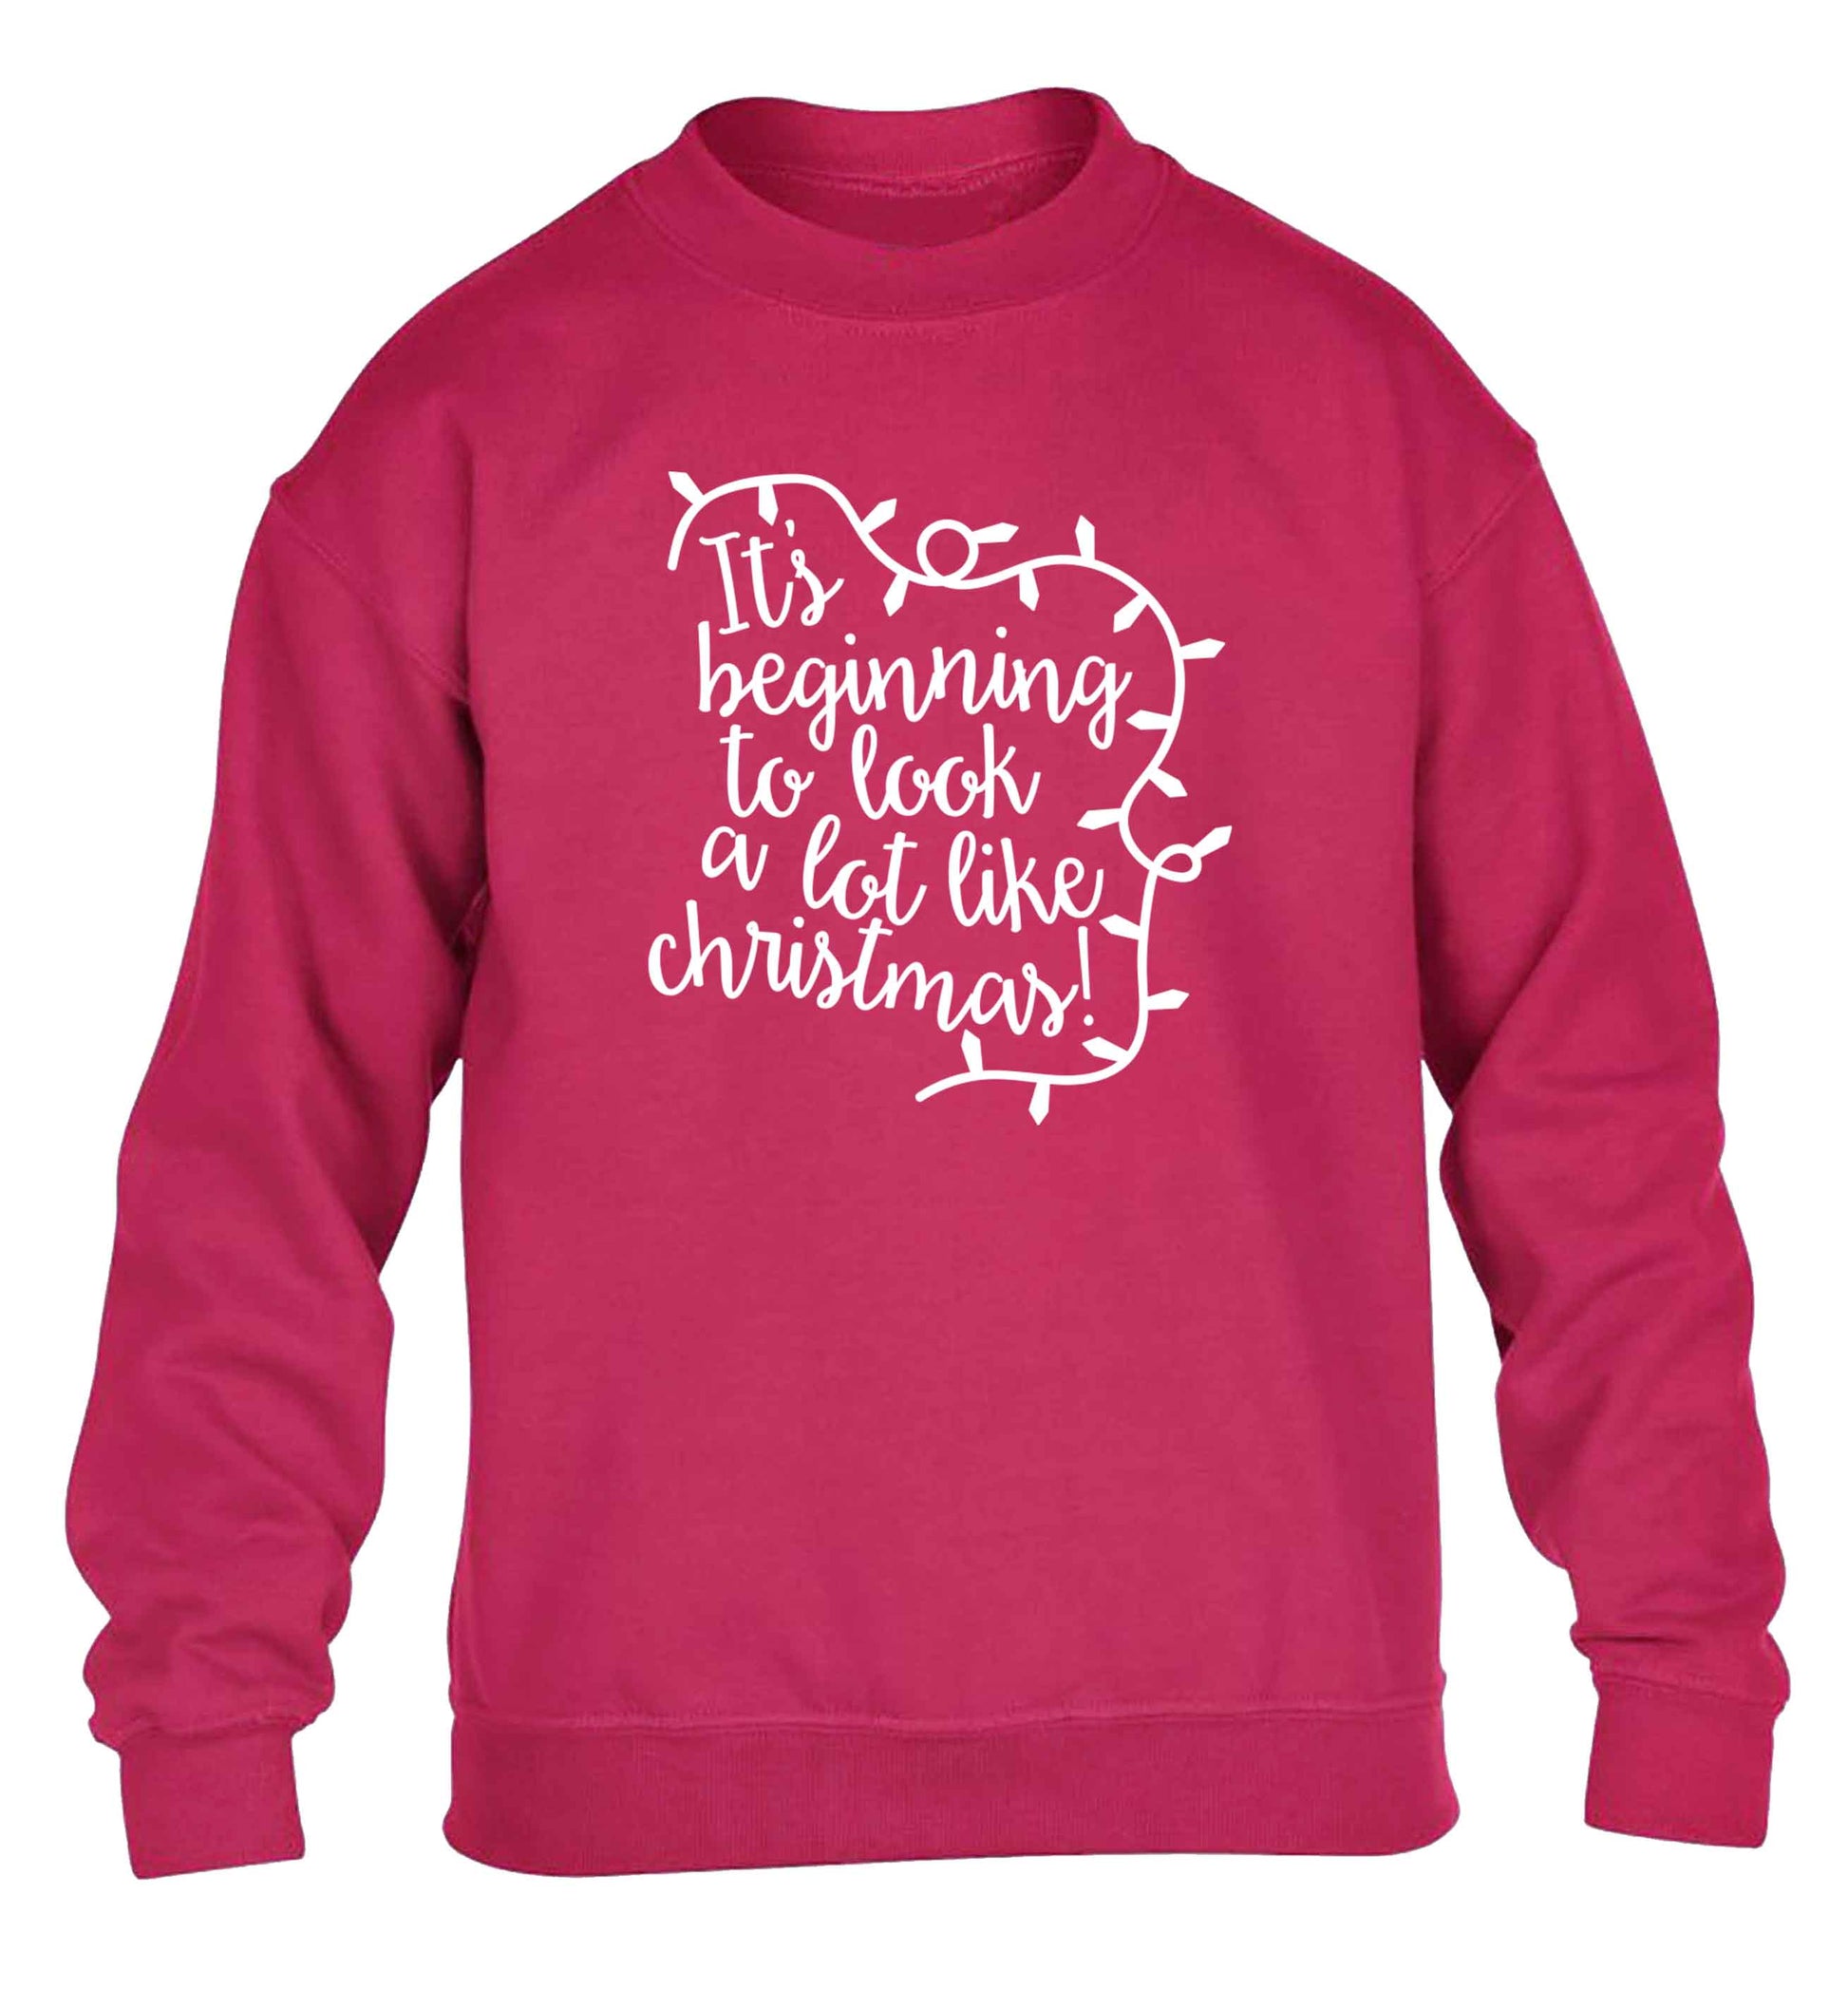 It's beginning to look a lot like Christmas children's pink sweater 12-13 Years